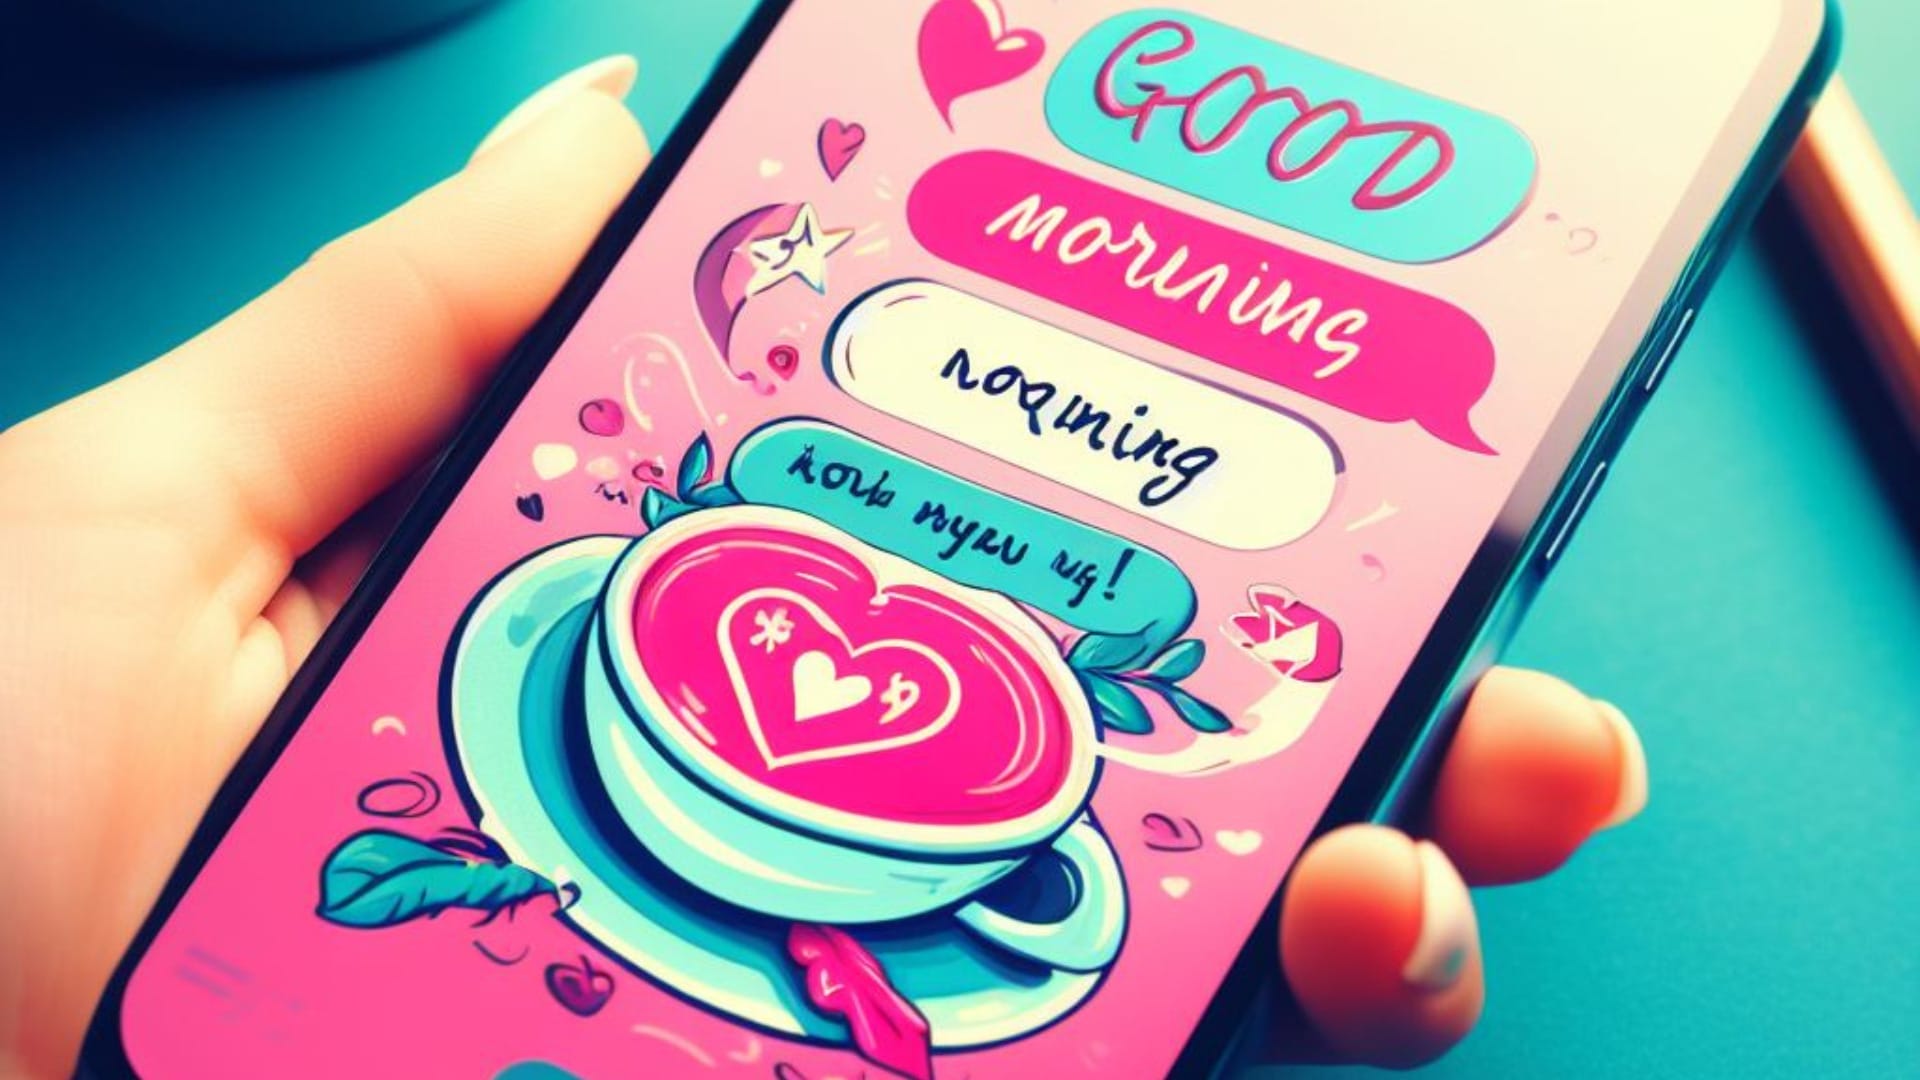 A vivid image showcasing a smartphone screen displaying an animated and affectionate 'what do you reply to good morning' text conversation. The conversation sets a charming and flirtatious tone for the day, filled with joyful words and affectionate emojis.